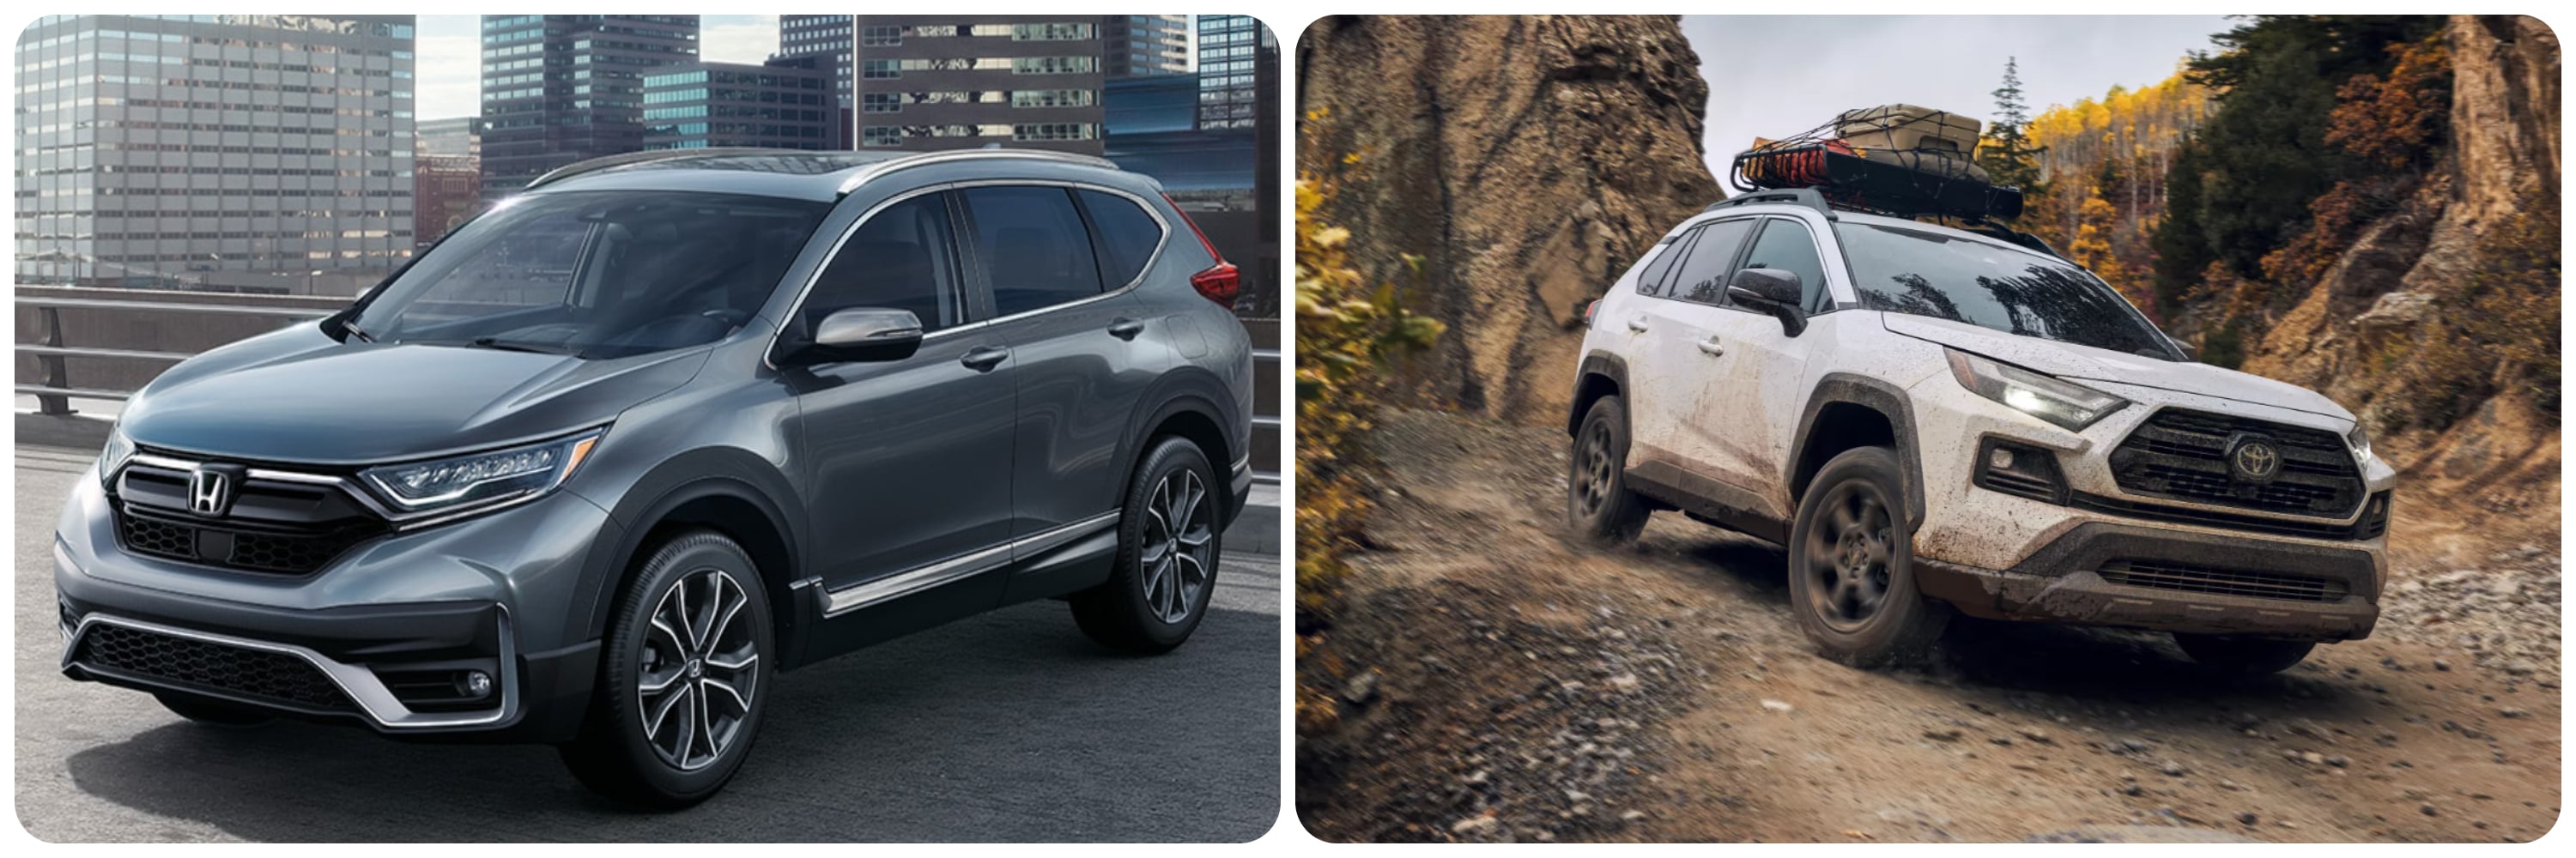 On the left a gray 2022 Honda CR-V sits parked on a rooftop lot and on the right a white and dirty 2022 Toyota RAV4 heads down a rocky terrain